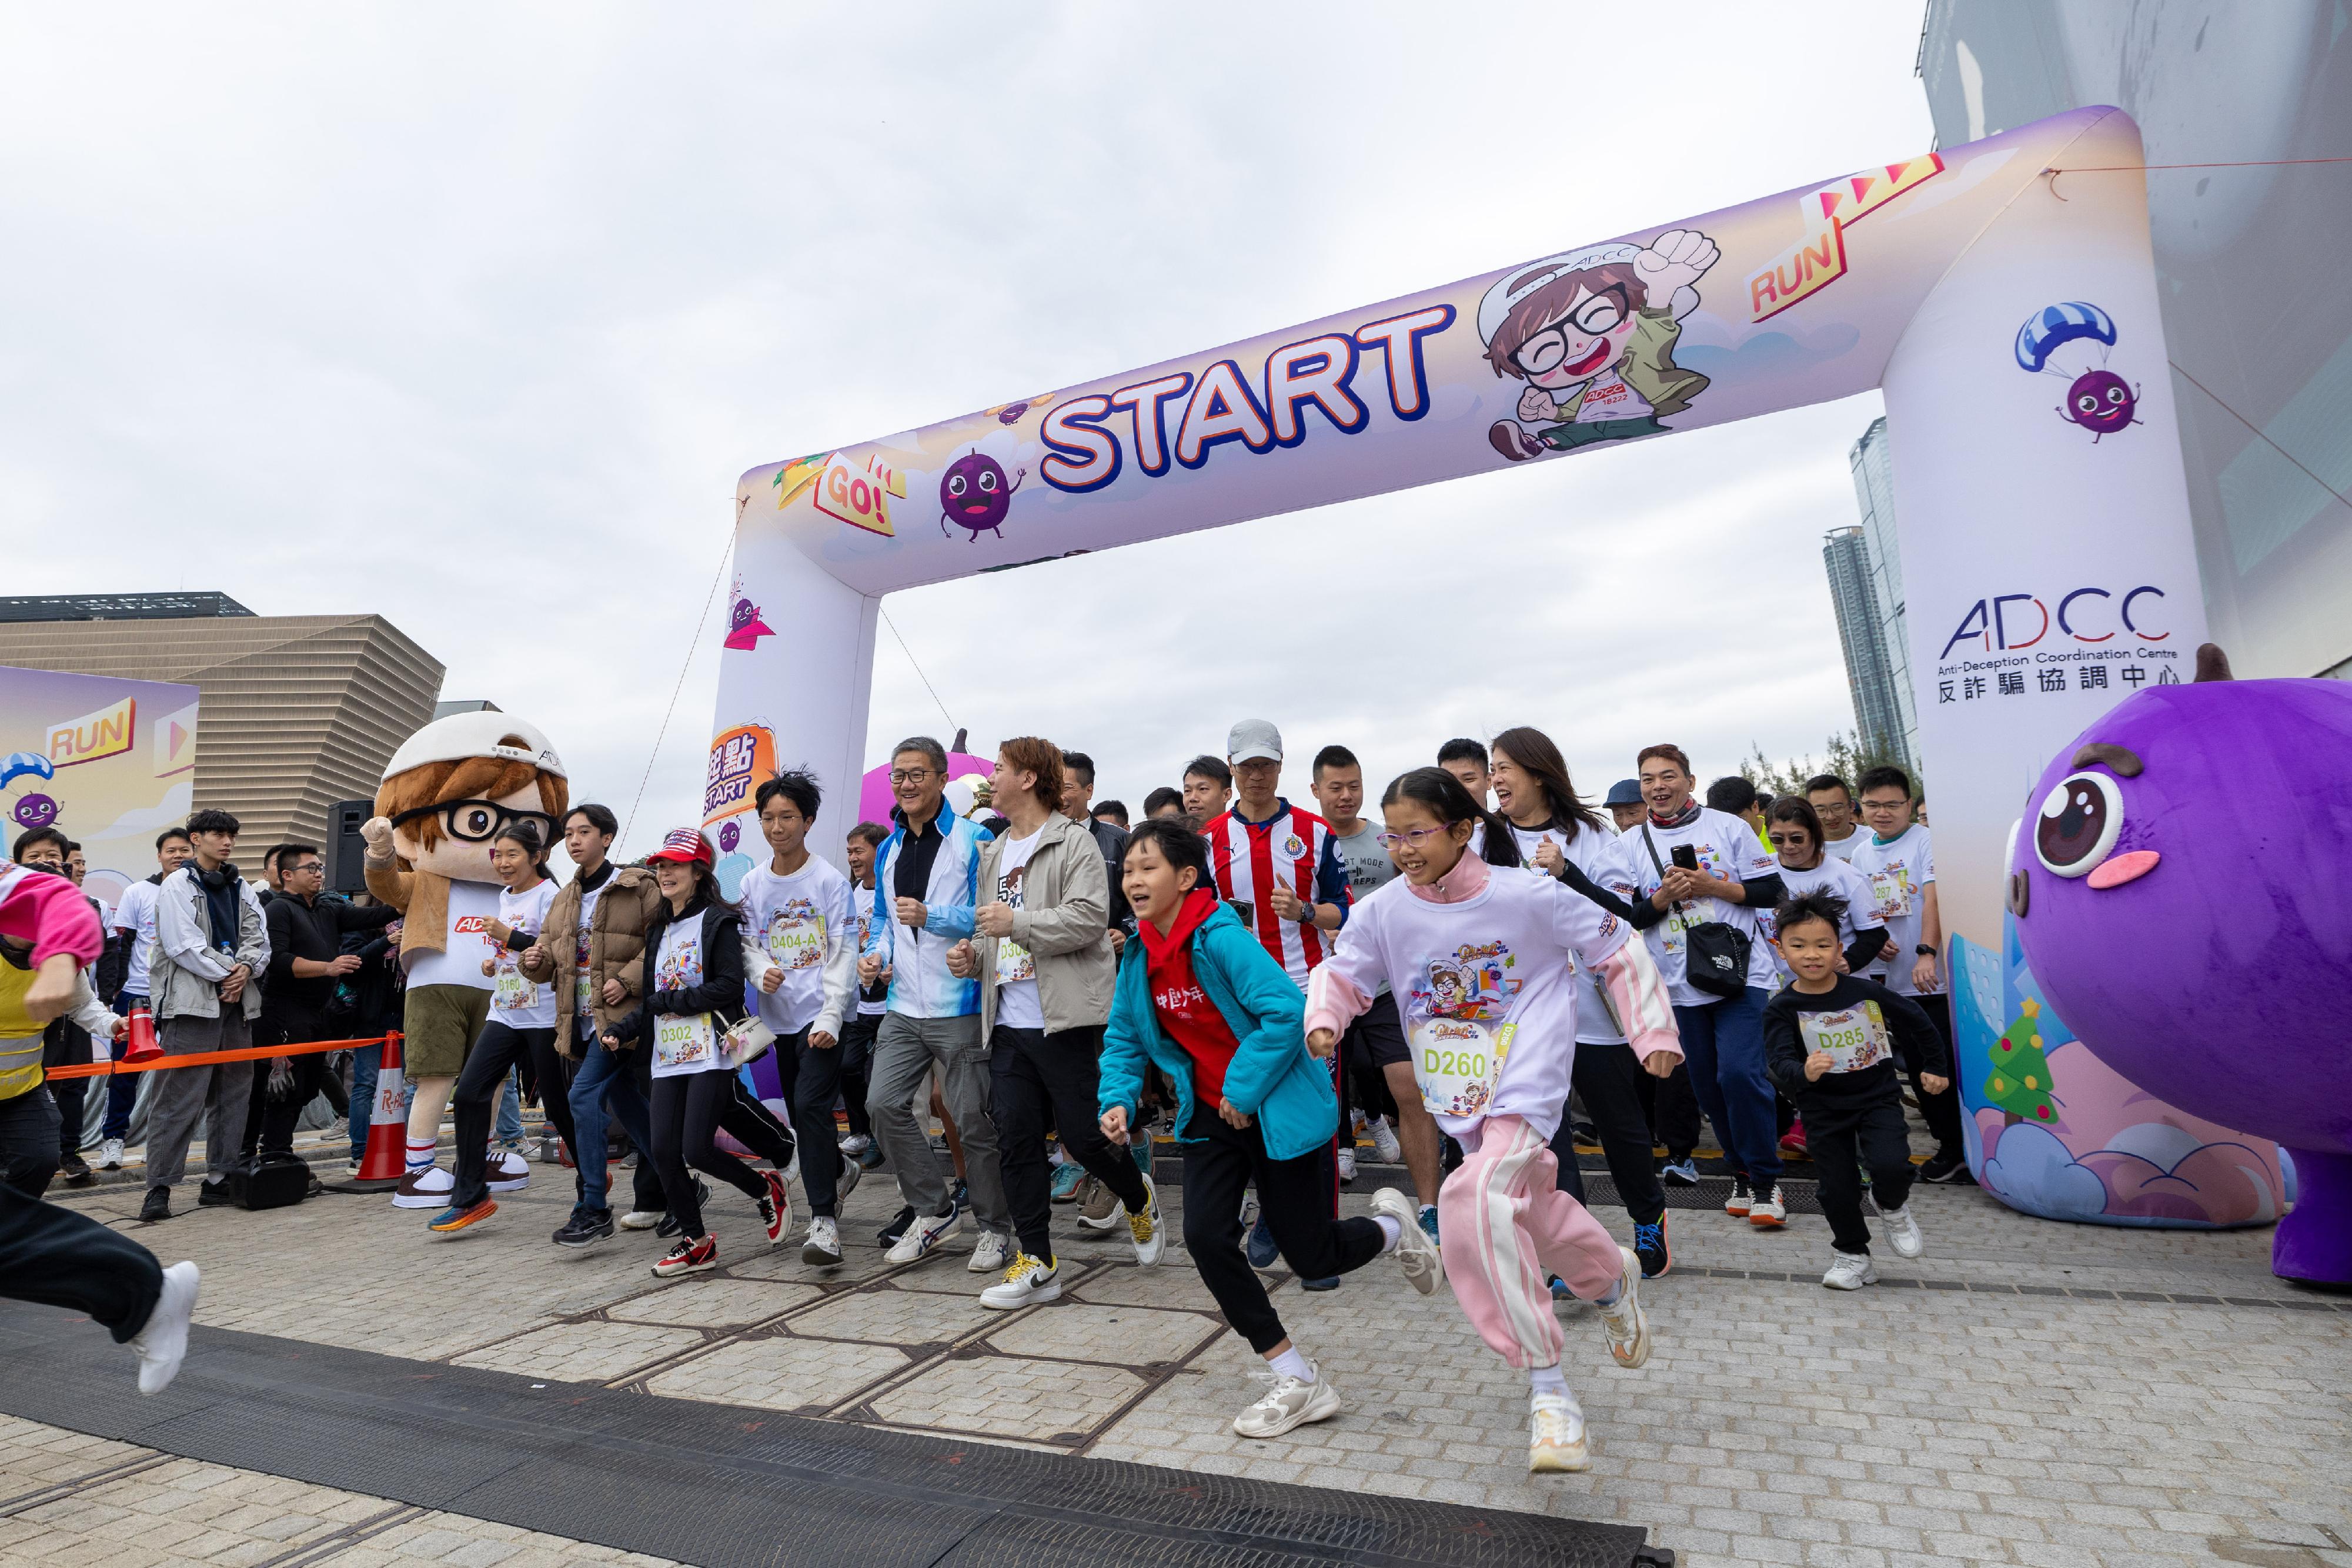 The Anti-Deception Coordination Centre of the Hong Kong Police Force organises the "West Kowloon CHILL RUN Winter Market cum Anti-Scam Charity Run 2023" at the West Kowloon Cultural District today (December 17). Photo shows the Commissioner of Police, Mr Siu Chak-yee (front row, centre) attending the event, promoting the public awareness of scam prevention with other runners.